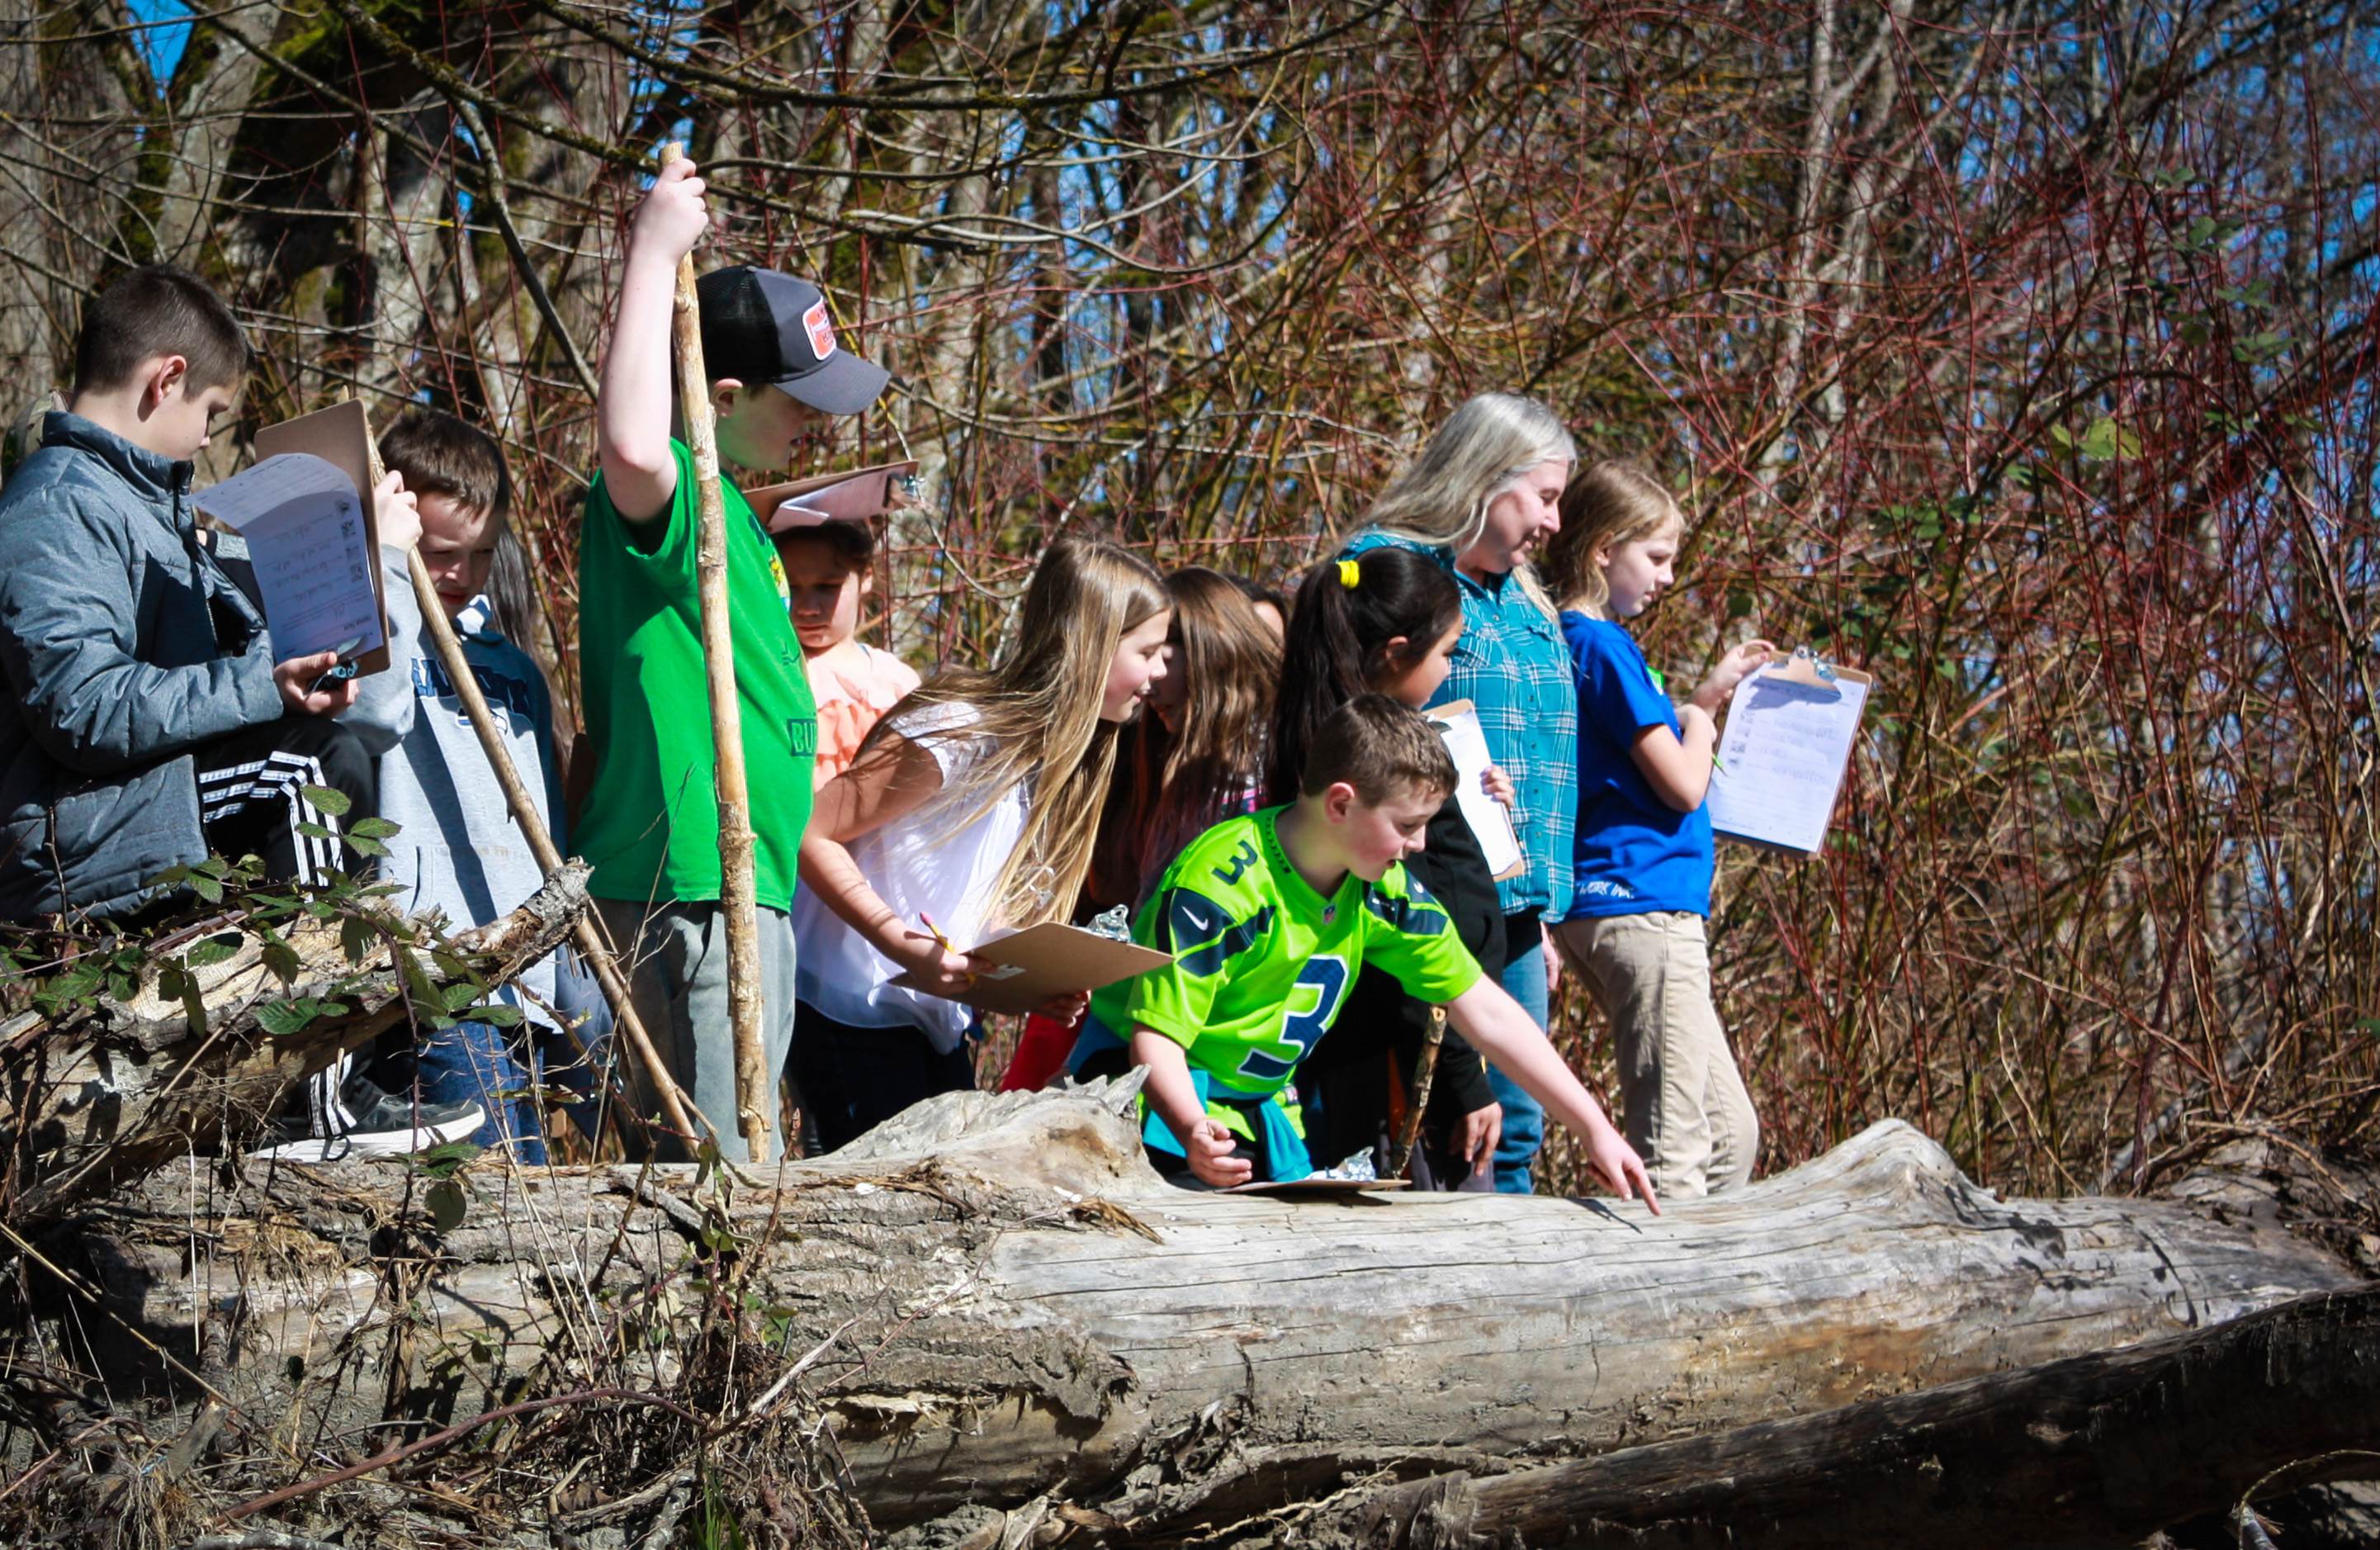 Fifth grade students from Lyman Elementary school participate in field-based environmental education at Lyman Slough, March 2018. Photograph credit: Skagit Land Trust staff.